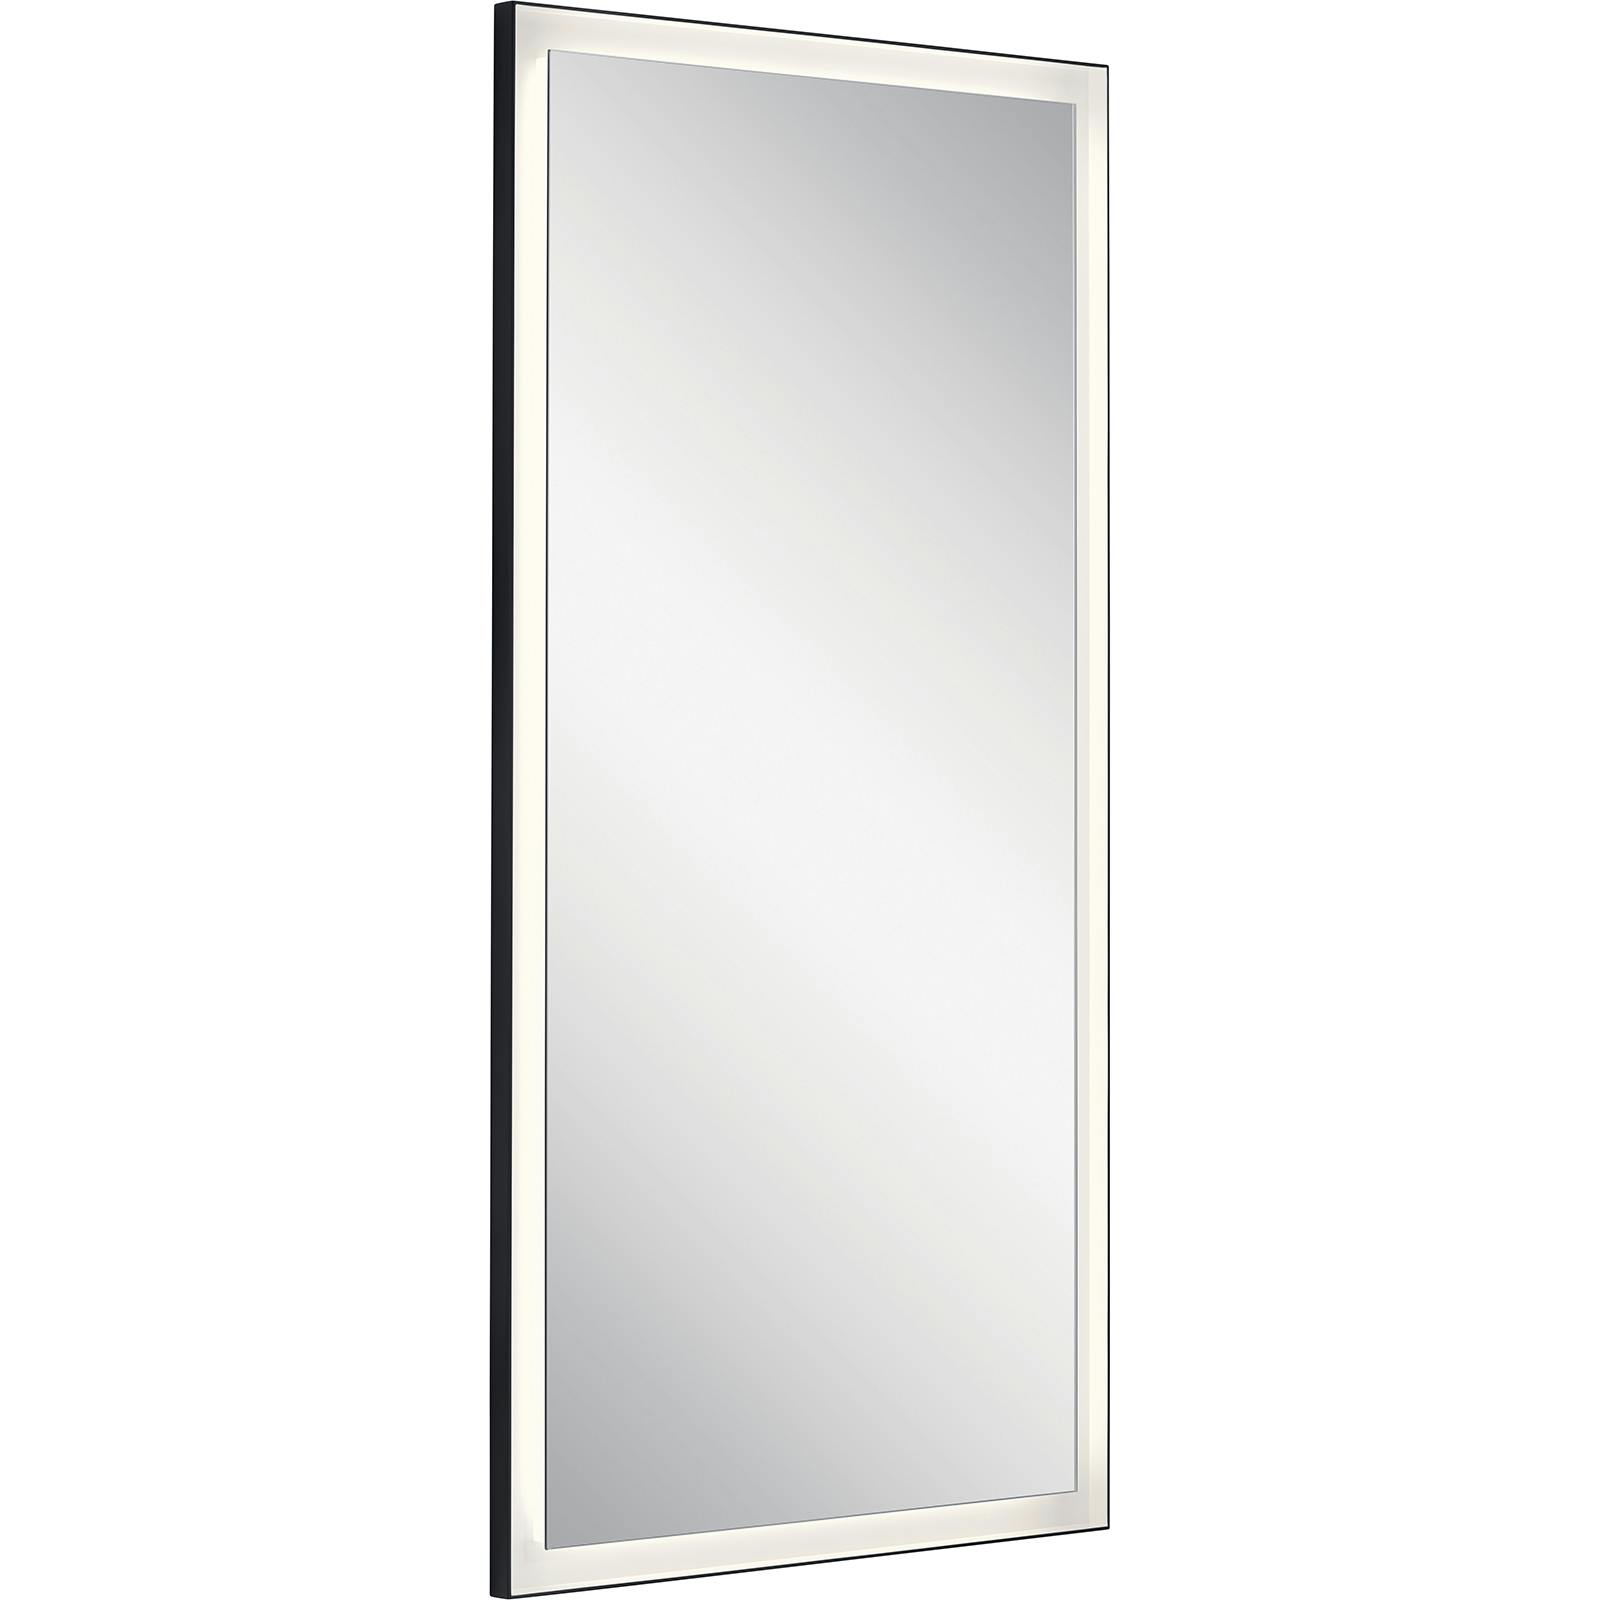 Ryame™ 30" Lighted Mirror Black on a white background